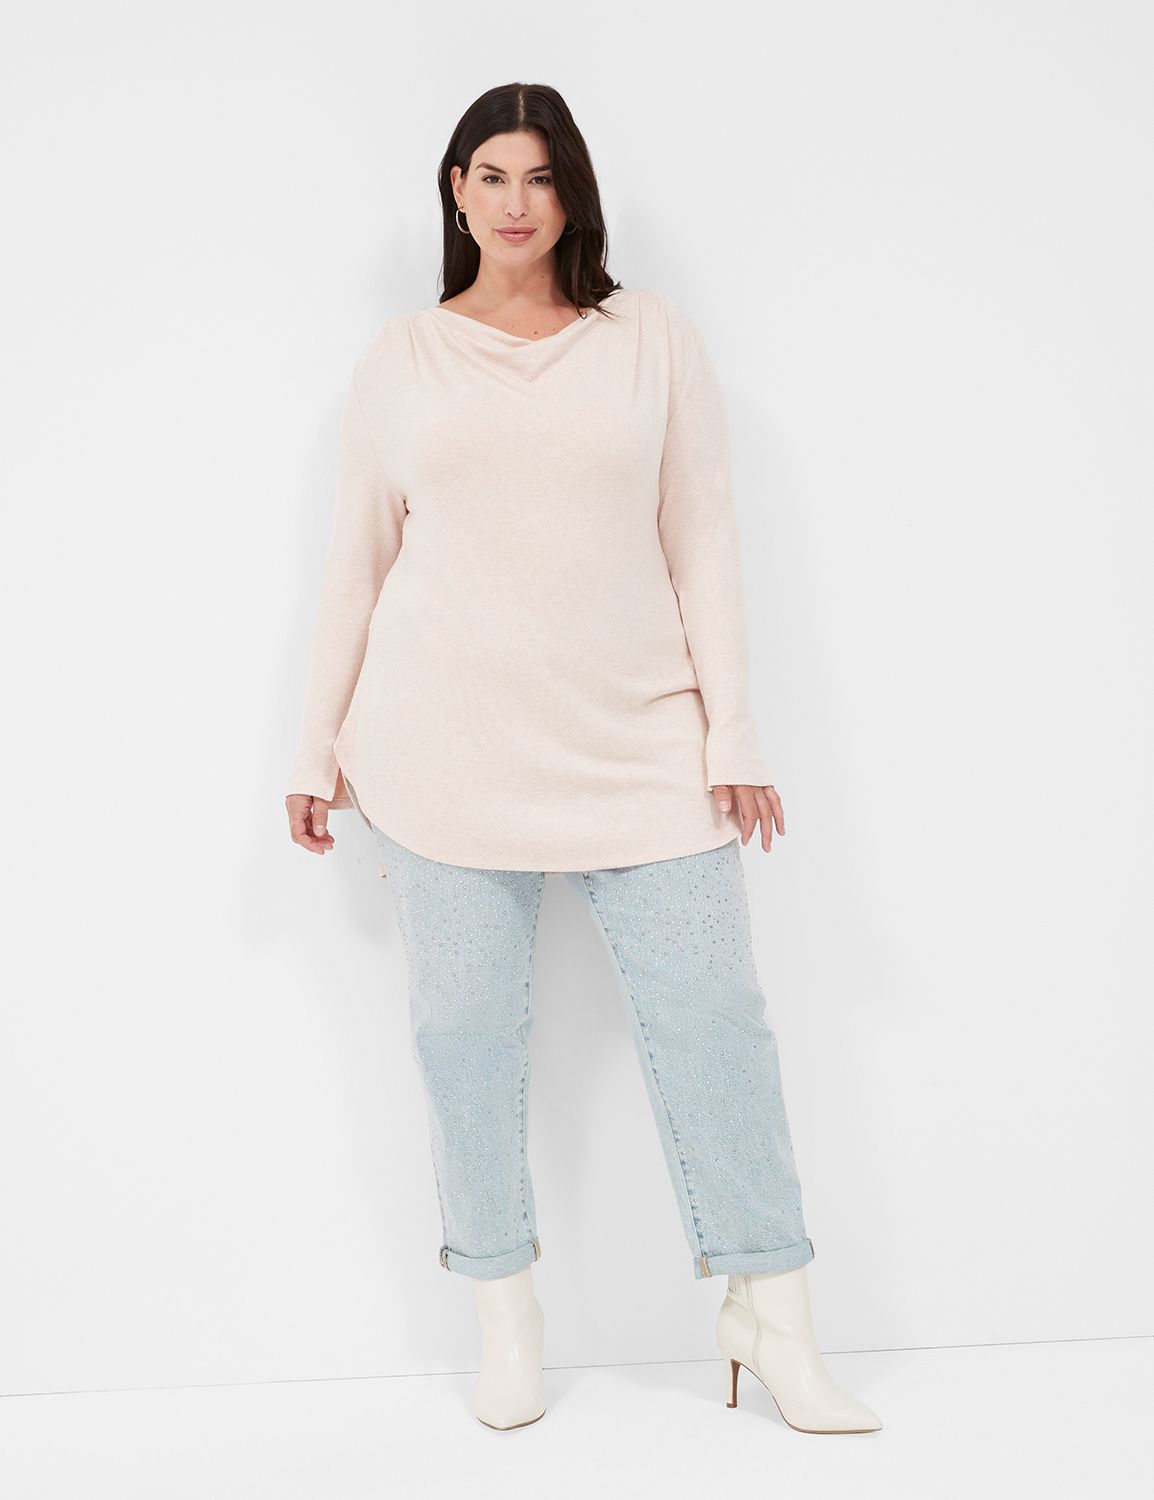 Relaxed Long Sleeve Cowl Neck Drop | LaneBryant